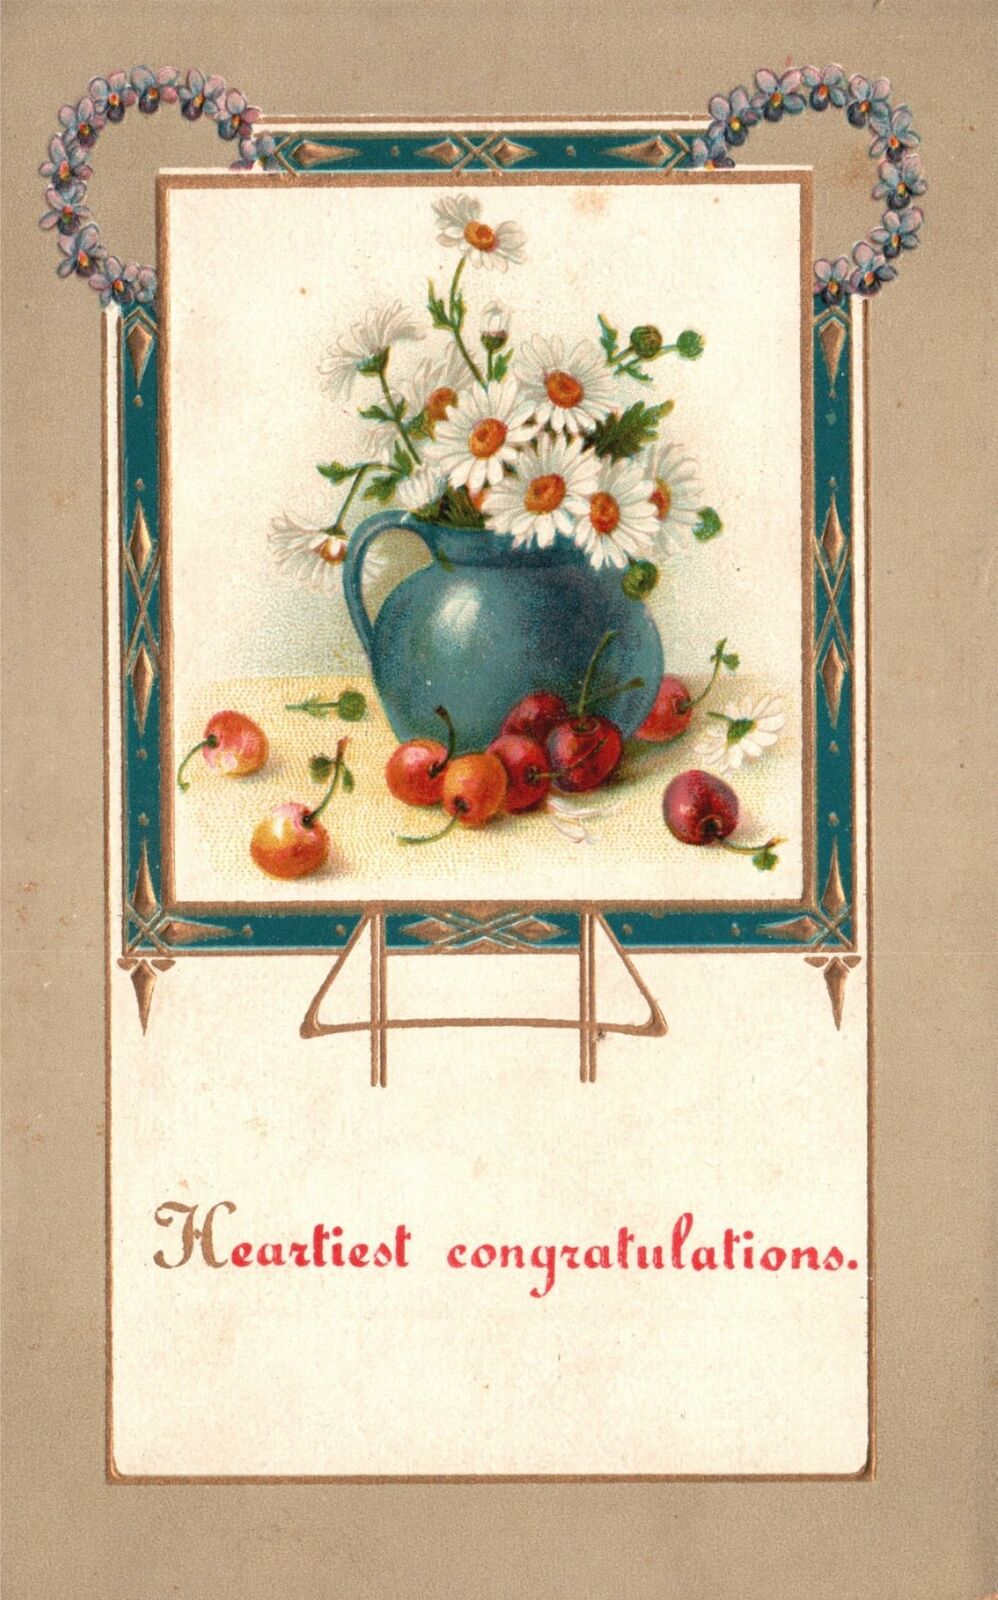 Vintage Postcard 1916 Heartiest Congratulations Sincere Greetings Card Letter